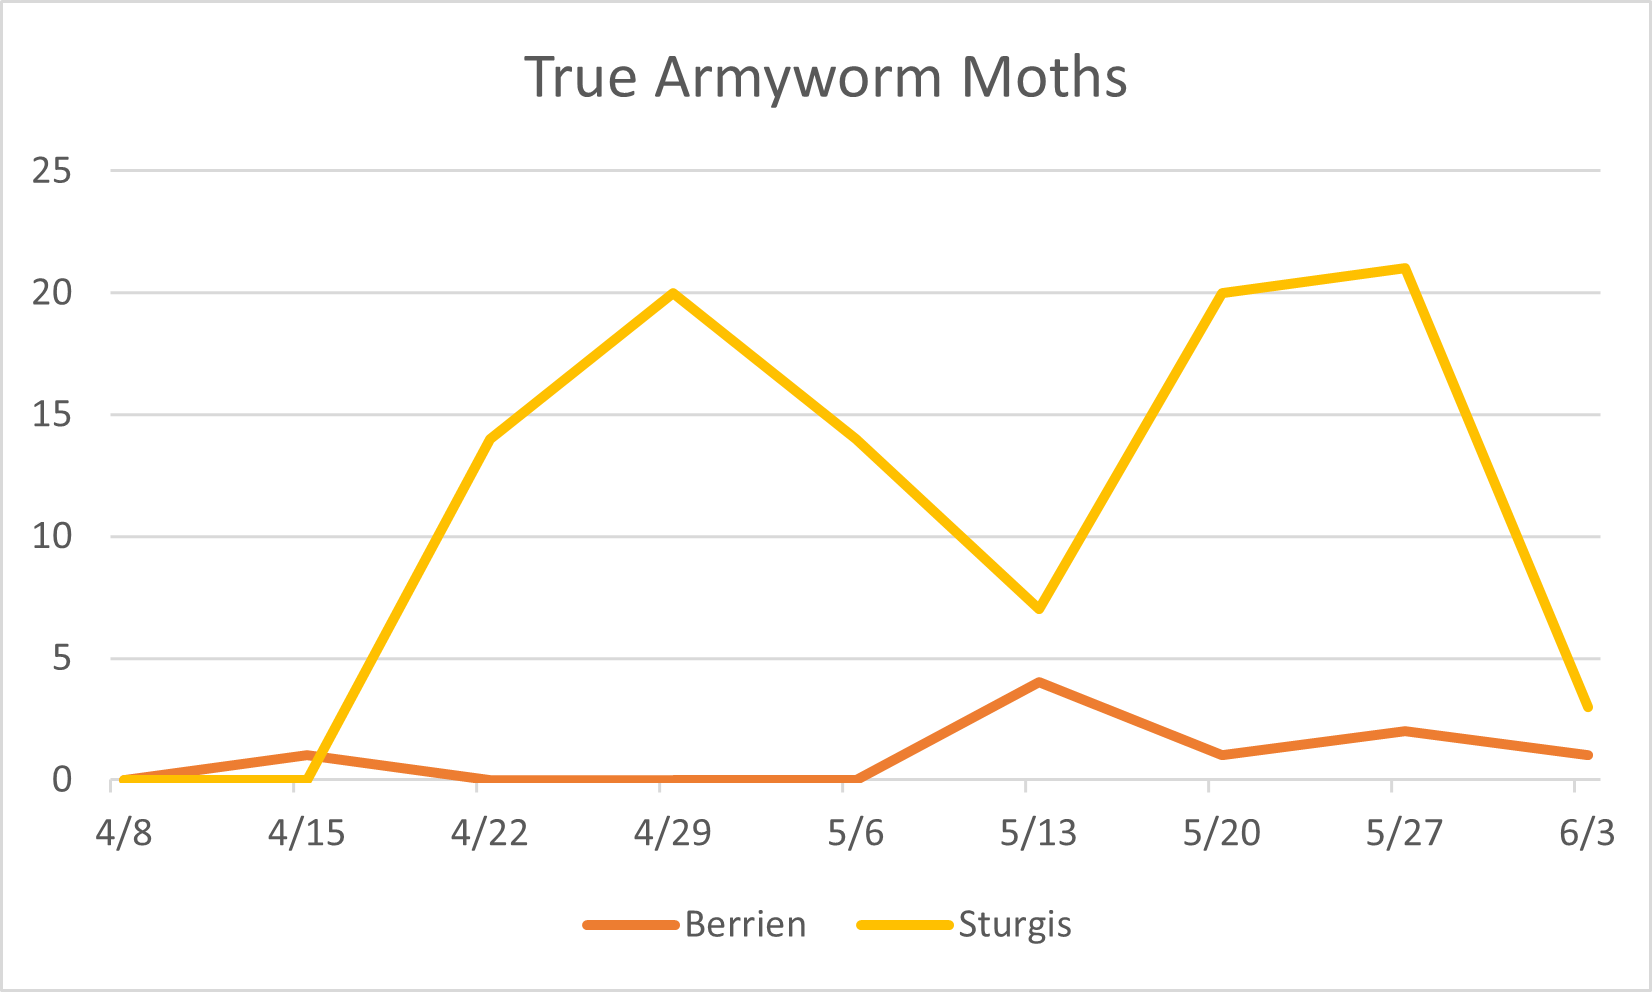 A graph showing true armyworm moth catches in Berrien and Sturgis.